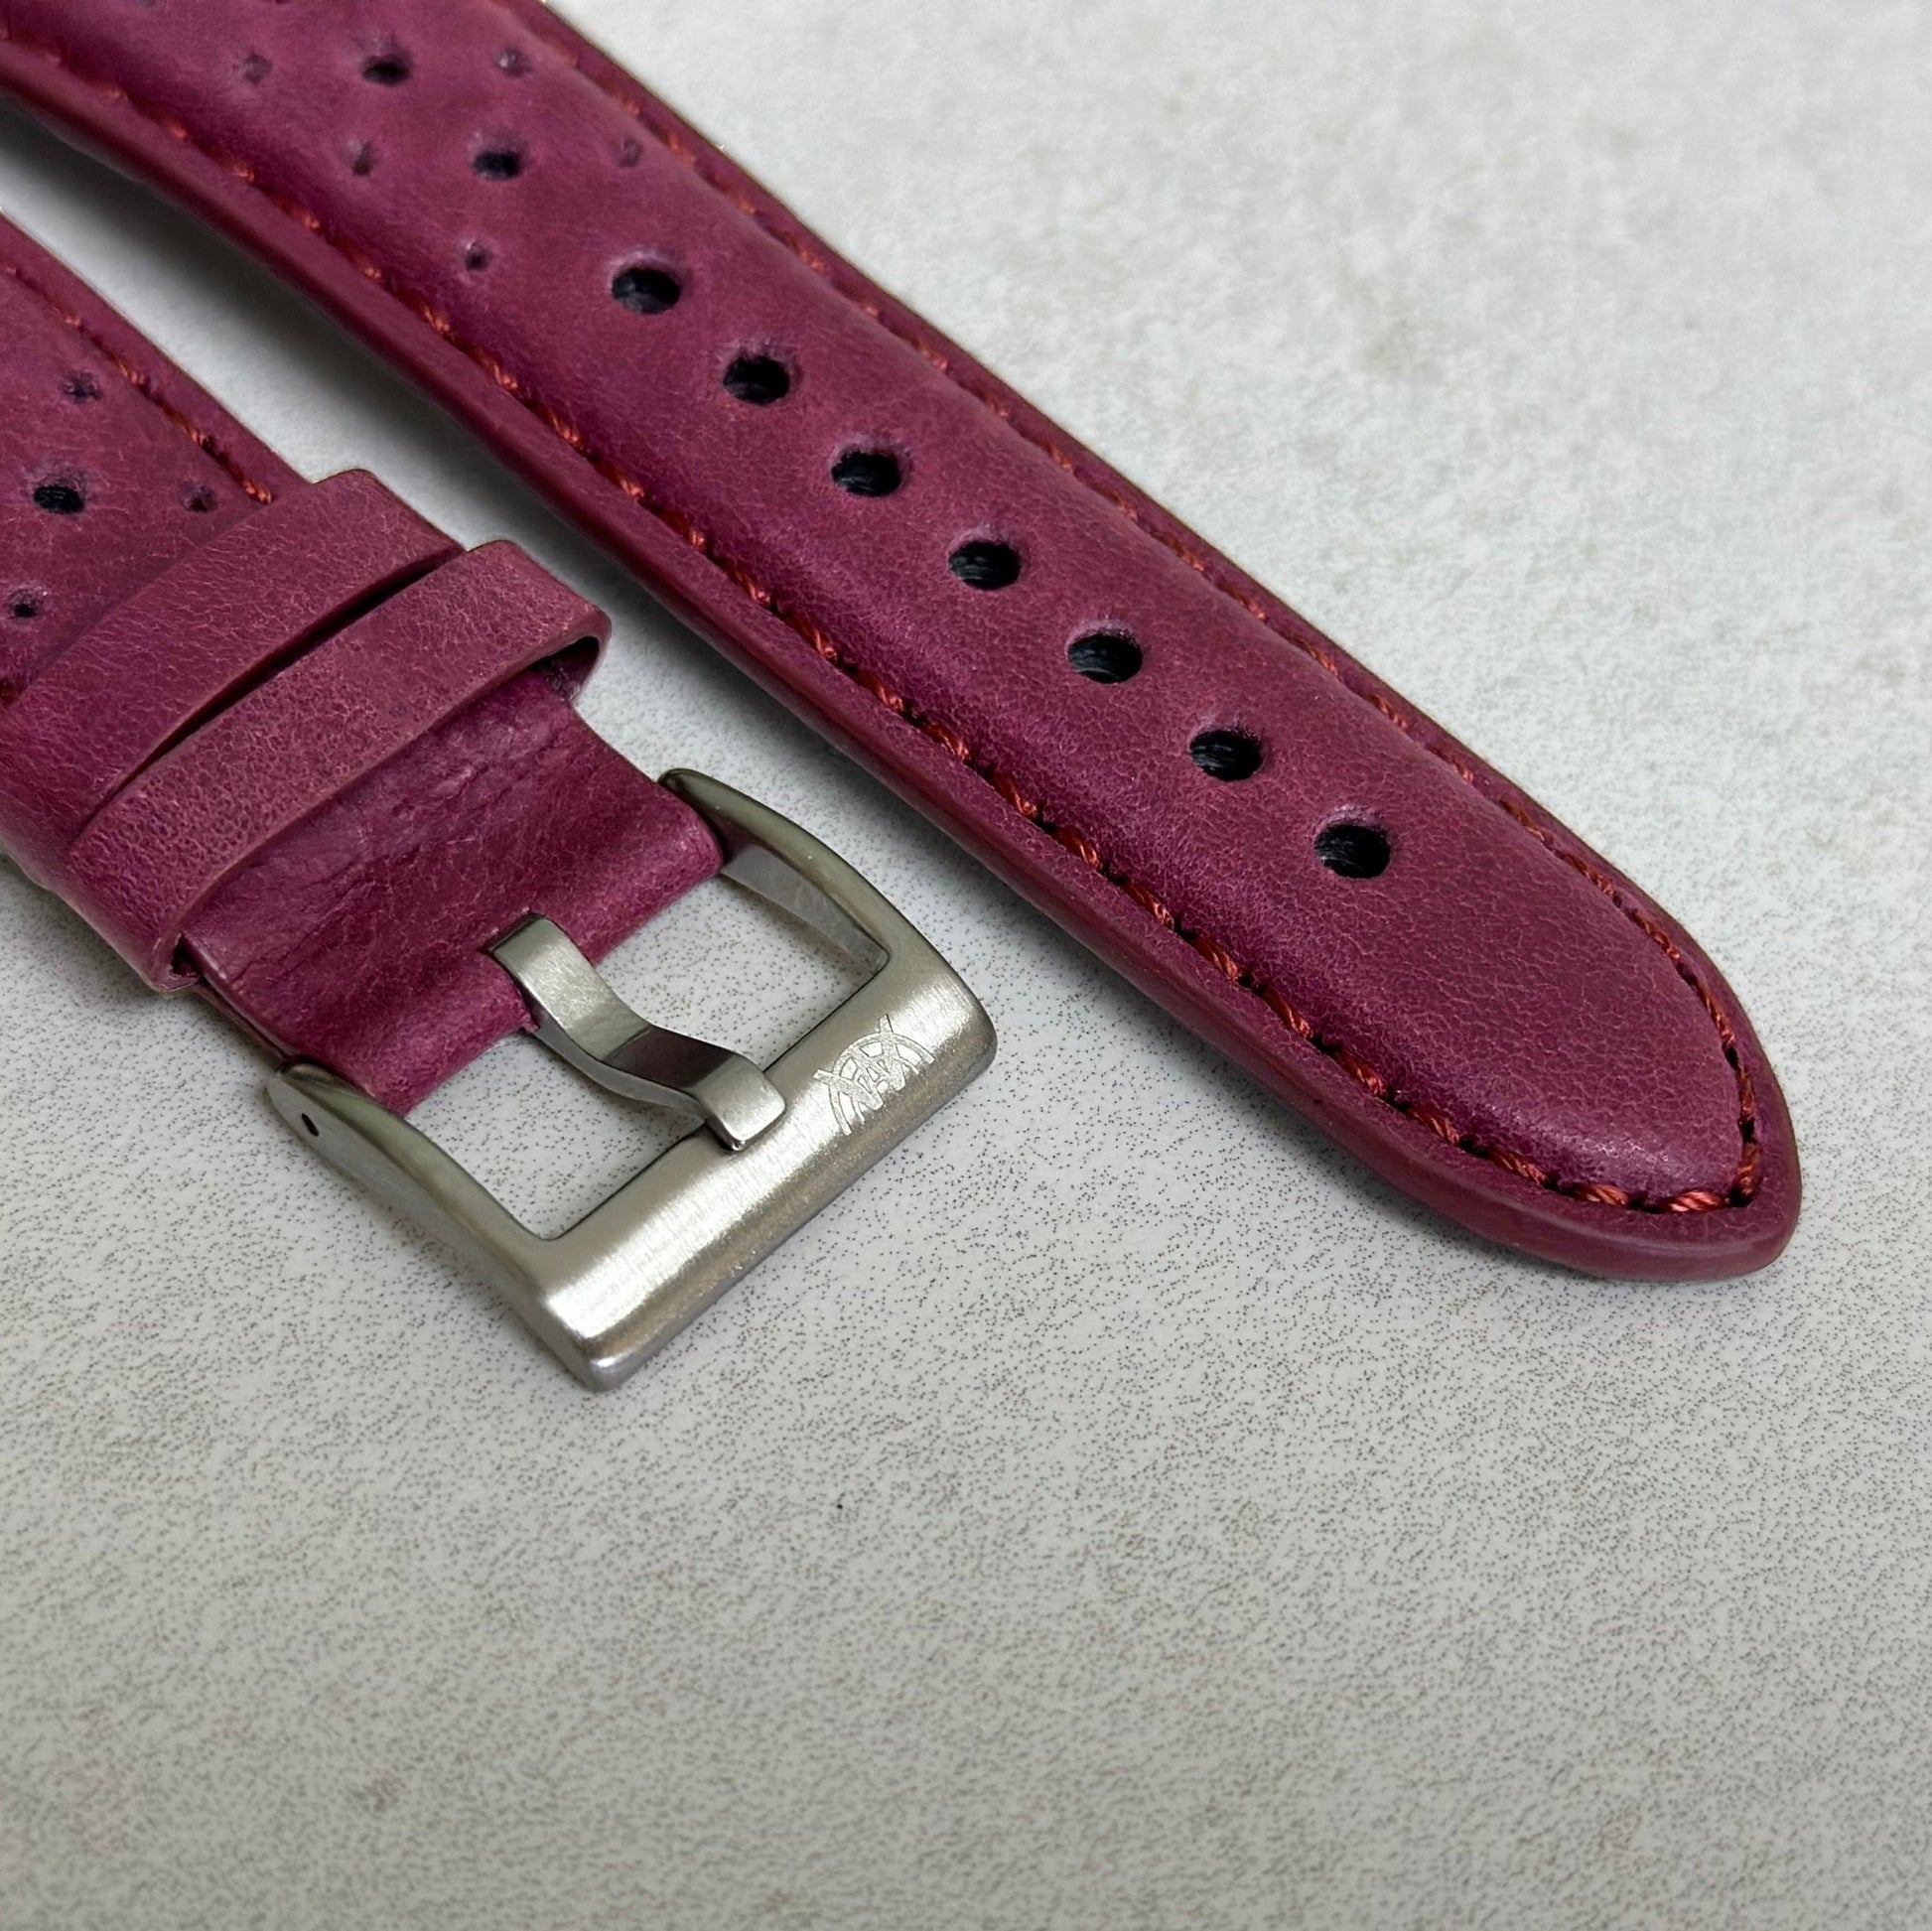 Brushed 316L stainless steel buckle on the Montecarlo purple full grain leather rally Apple Watch strap. Watch And Strap